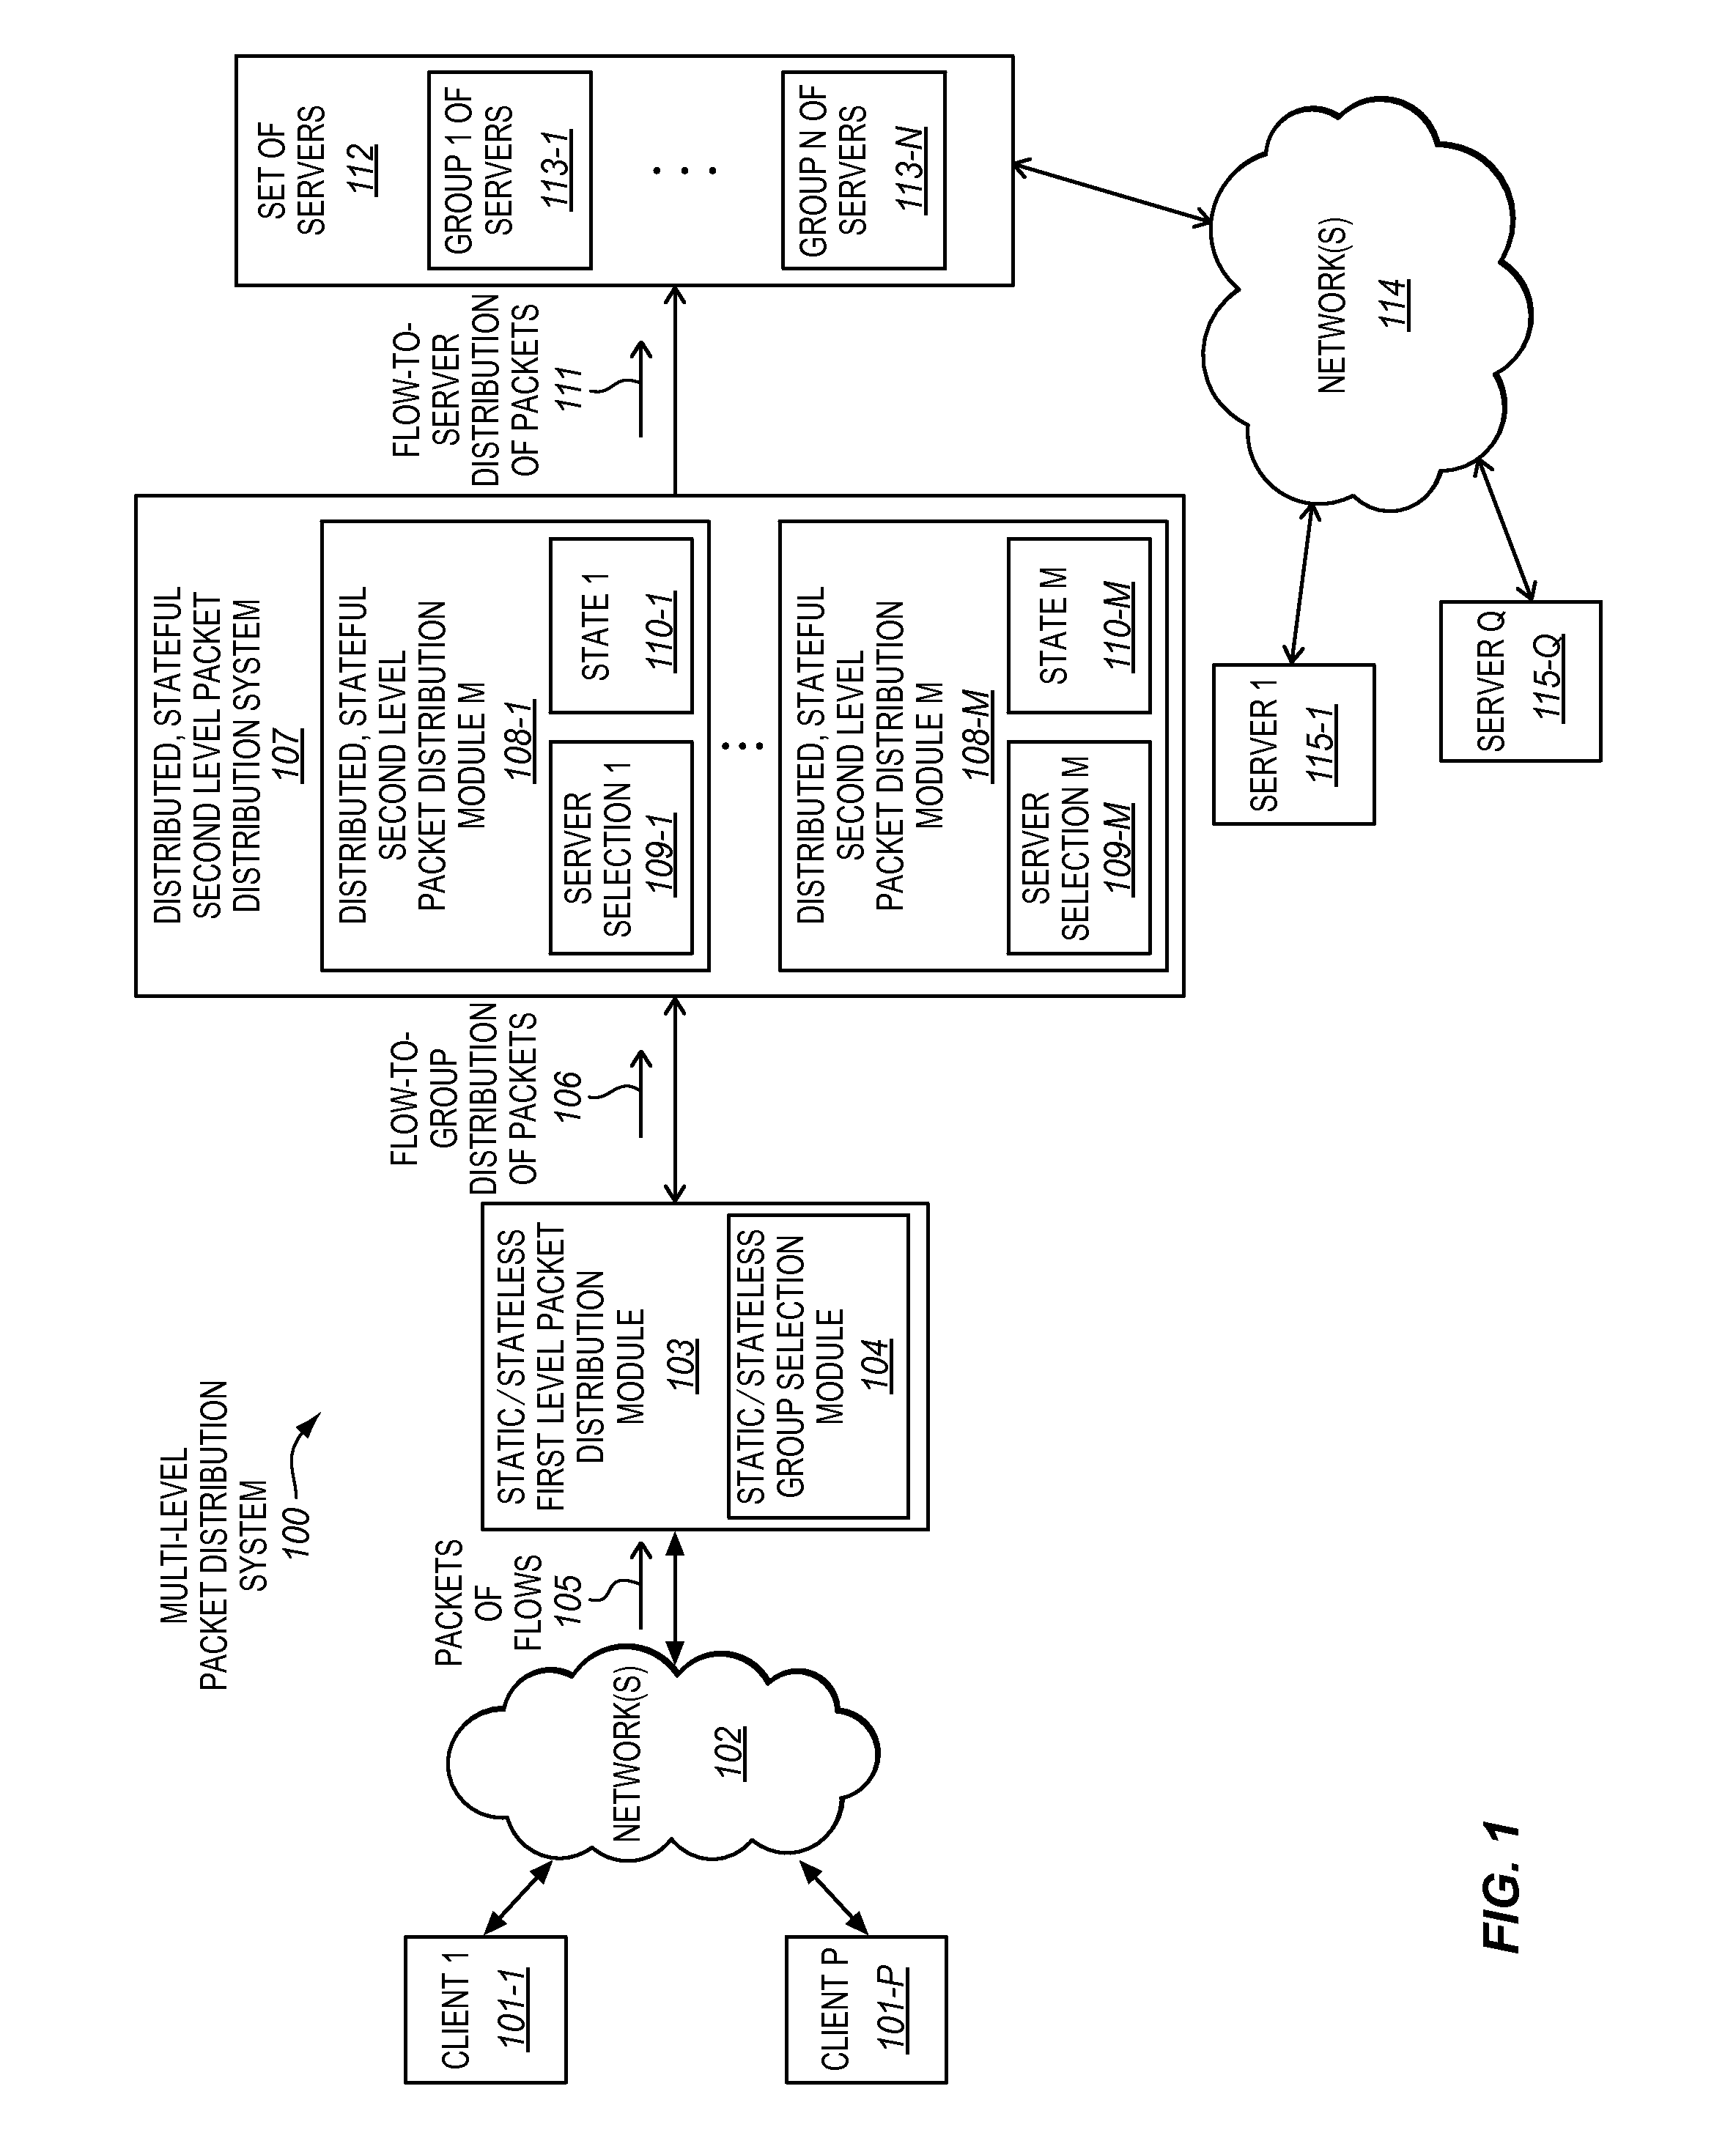 Two level packet distribution with stateless first level packet distribution to a group of servers and stateful second level packet distribution to a server within the group